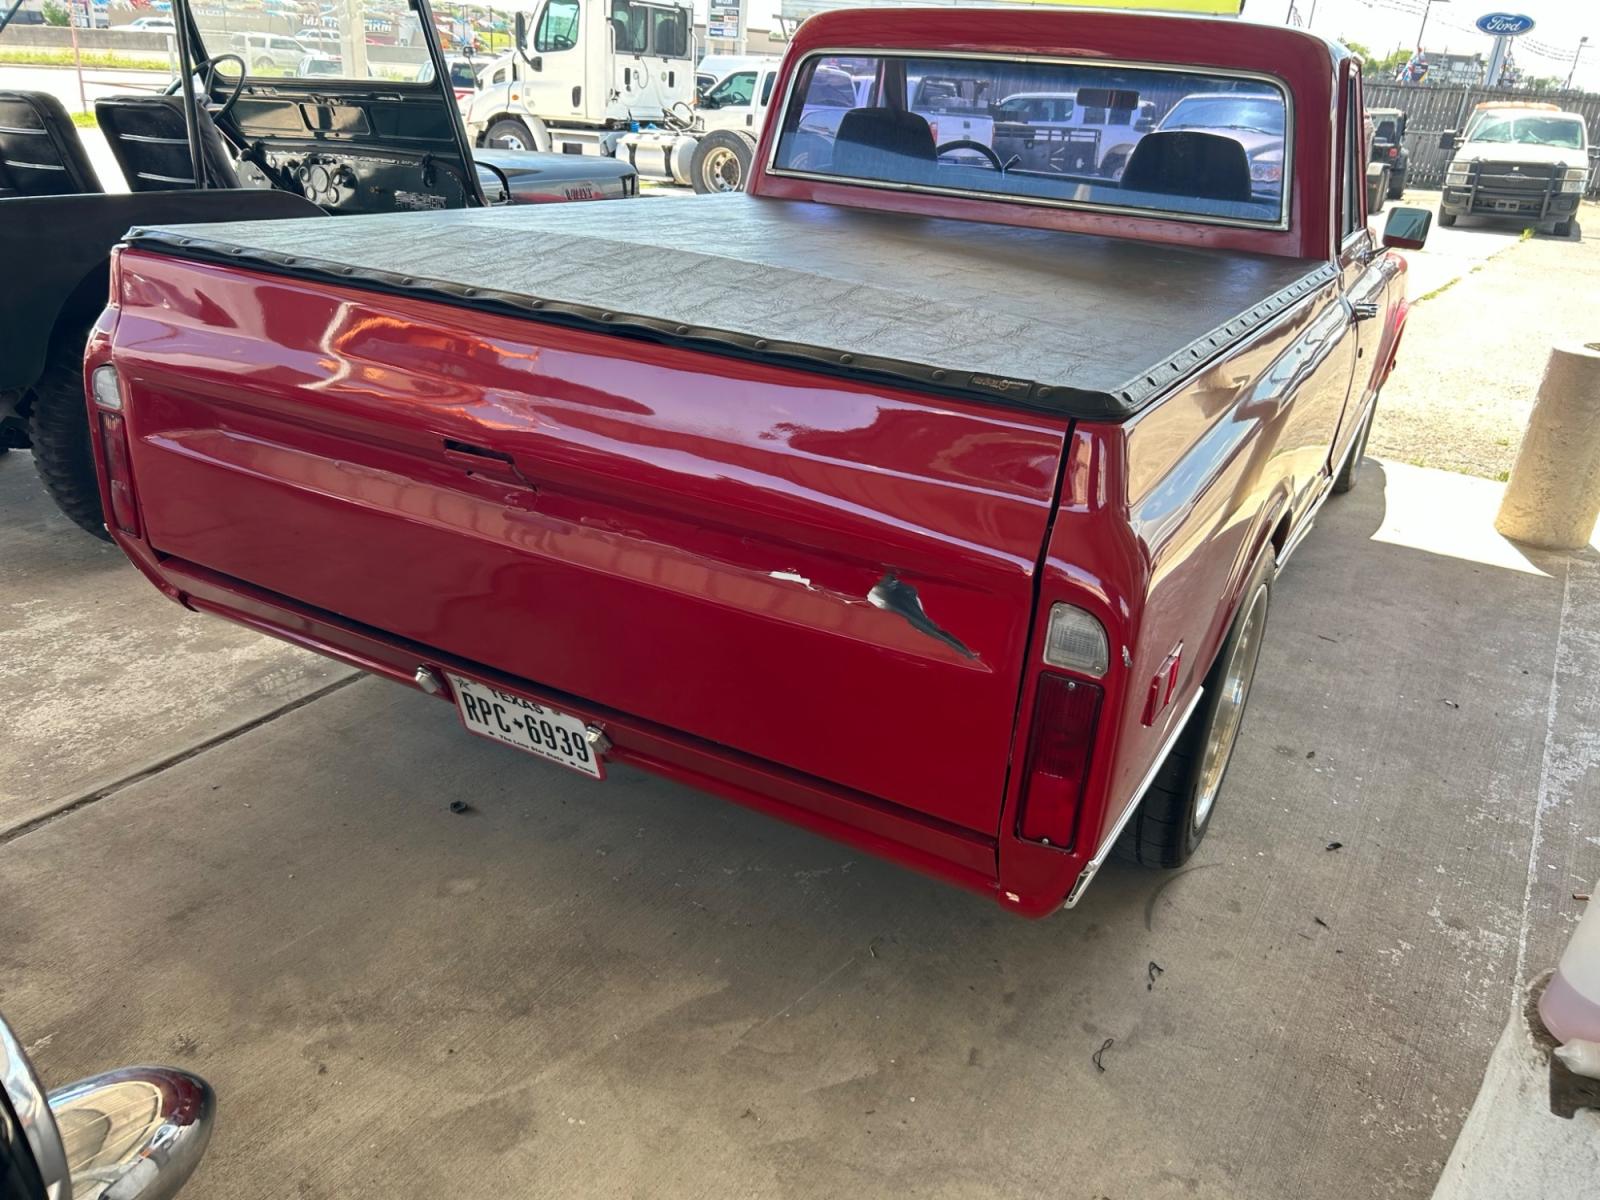 1972 Red Chevrolet C10 (CCE142A1201) , located at 1687 Business 35 S, New Braunfels, TX, 78130, (830) 625-7159, 29.655487, -98.051491 - Photo #3